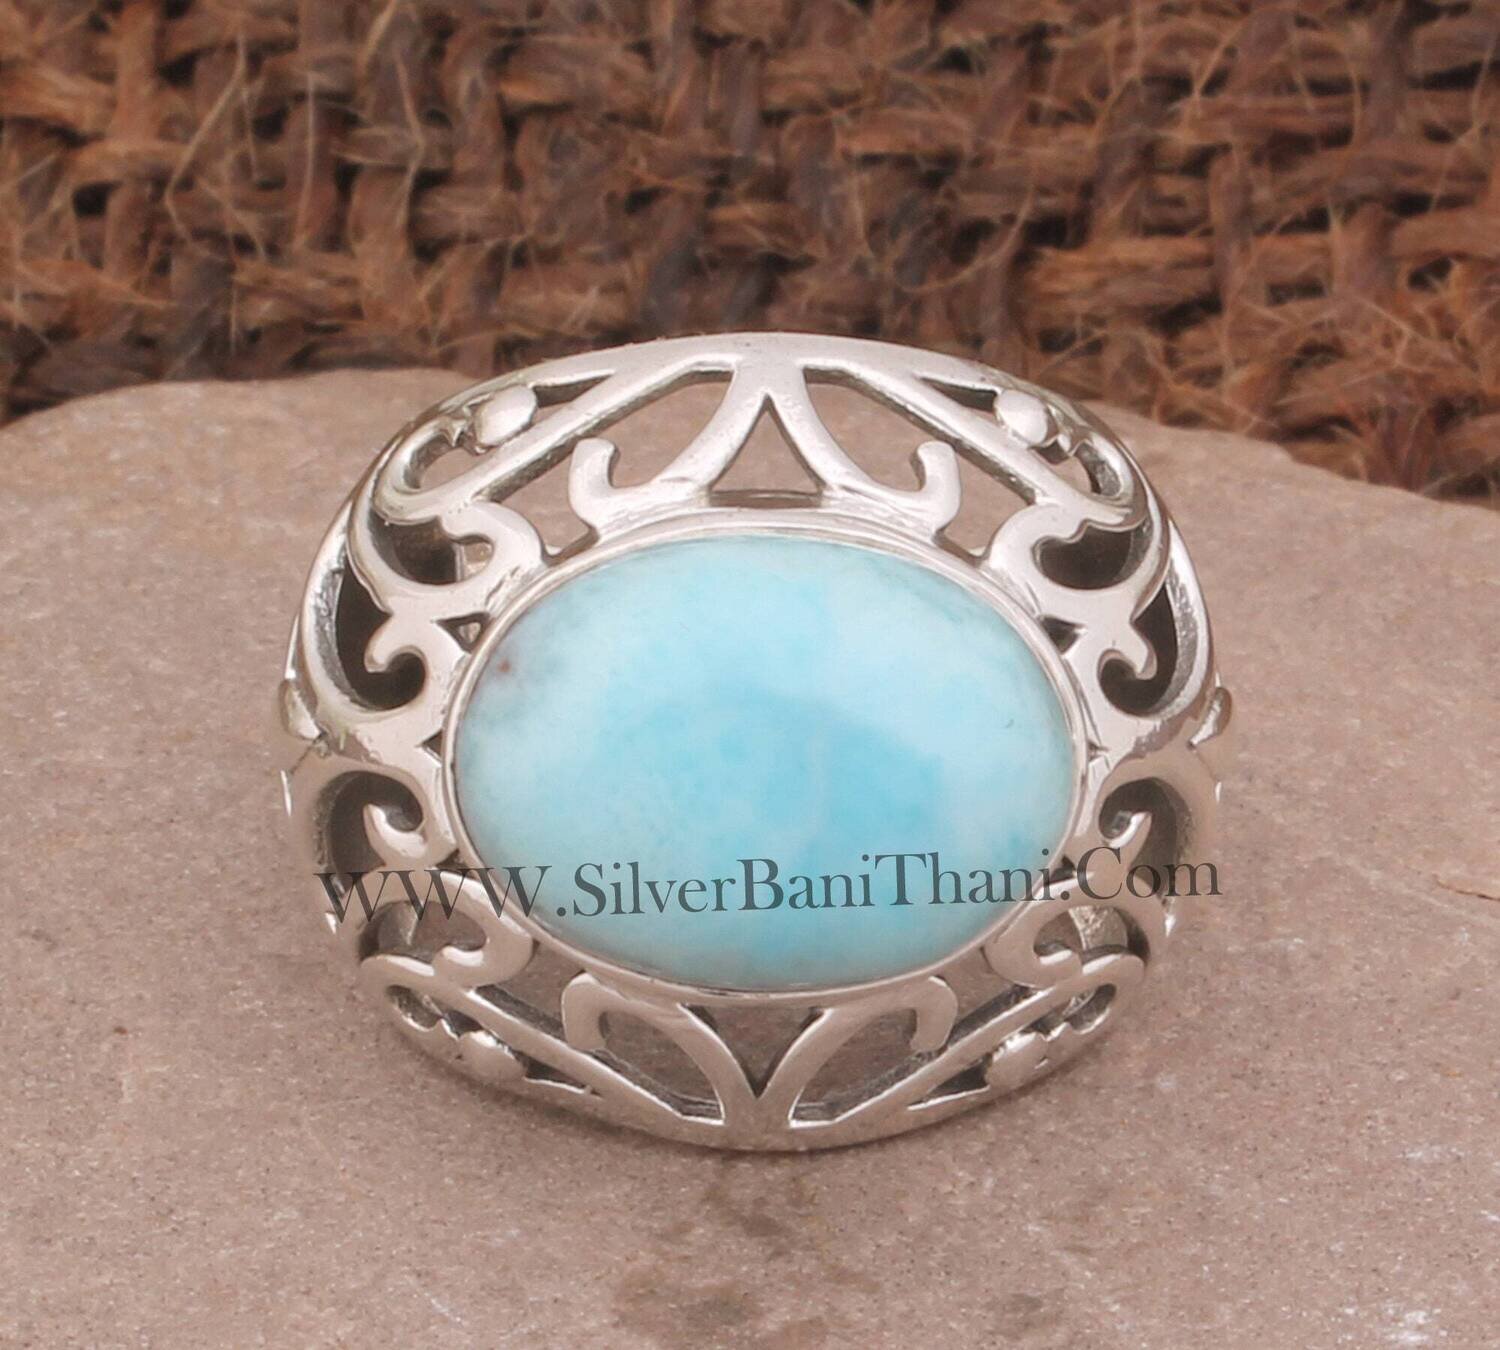 Larimar Stone Ring 925 Sterling Silver Ring For Women Bohemian Jewelry Boho, Simple Ring with Stone Blue Gemstone Birthday Jewelry For Women